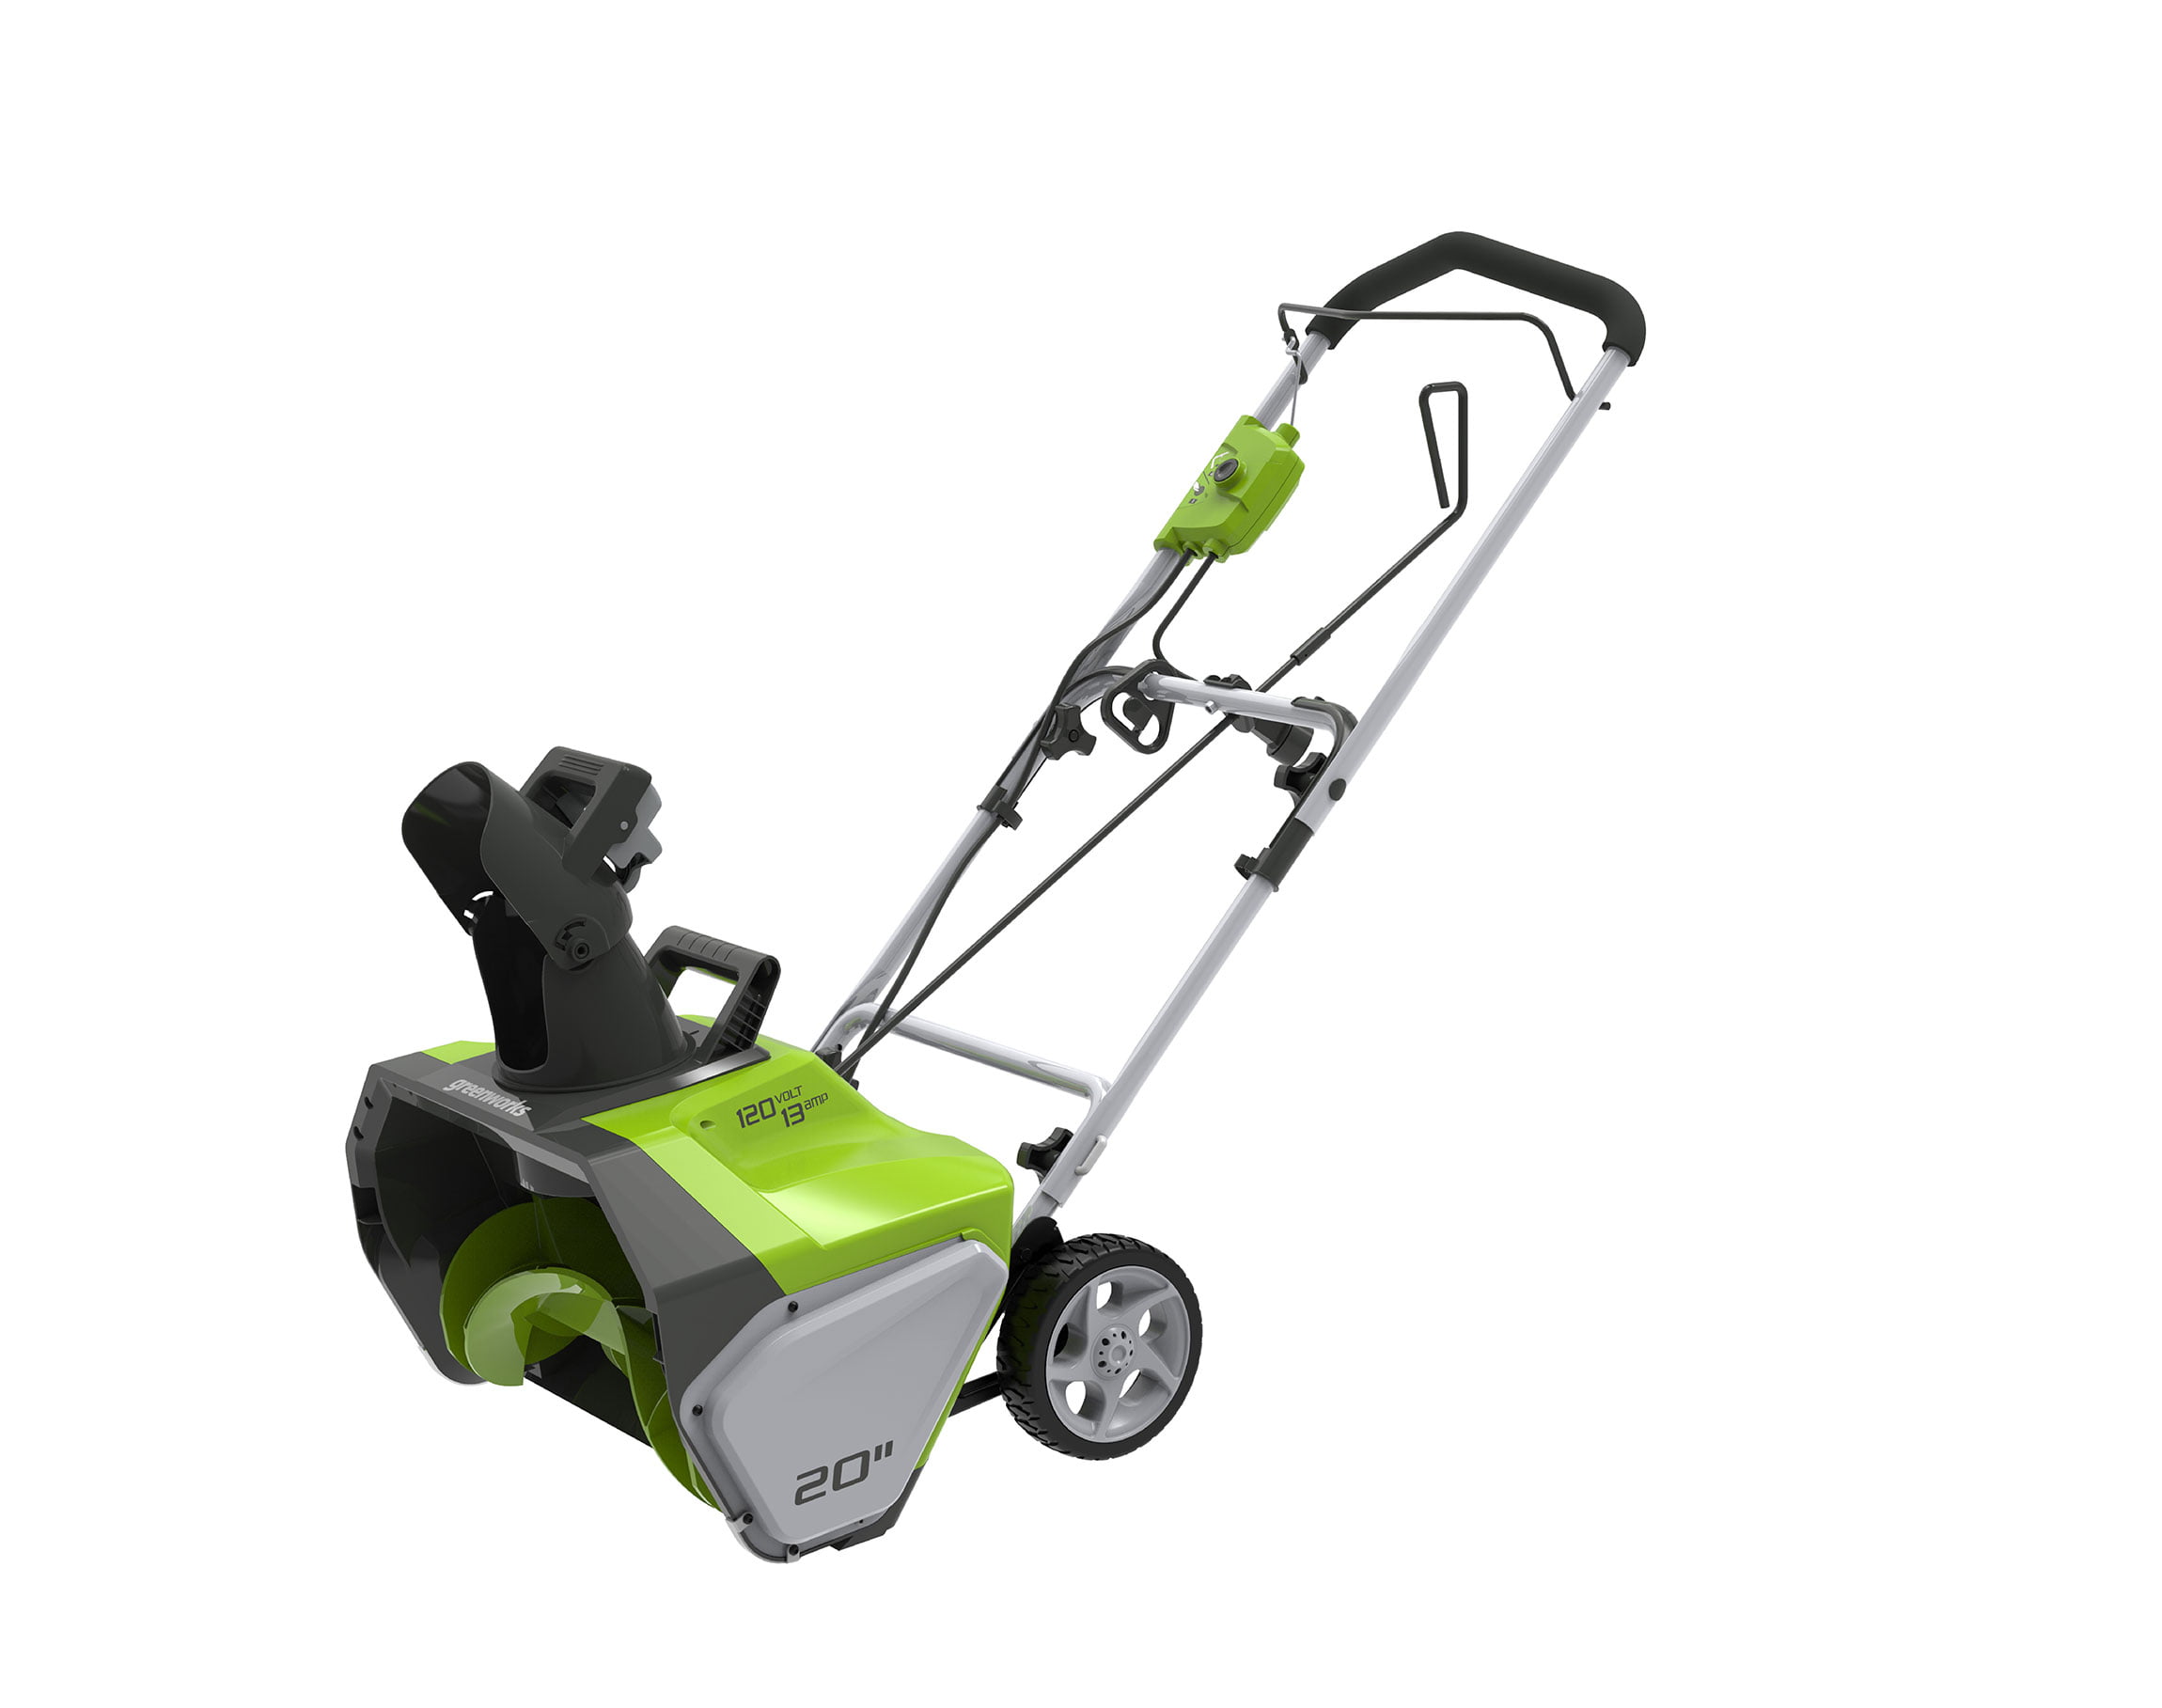 20" Greenworks 13-Amp Corded Electric Snow Thrower $88 + Free Shipping